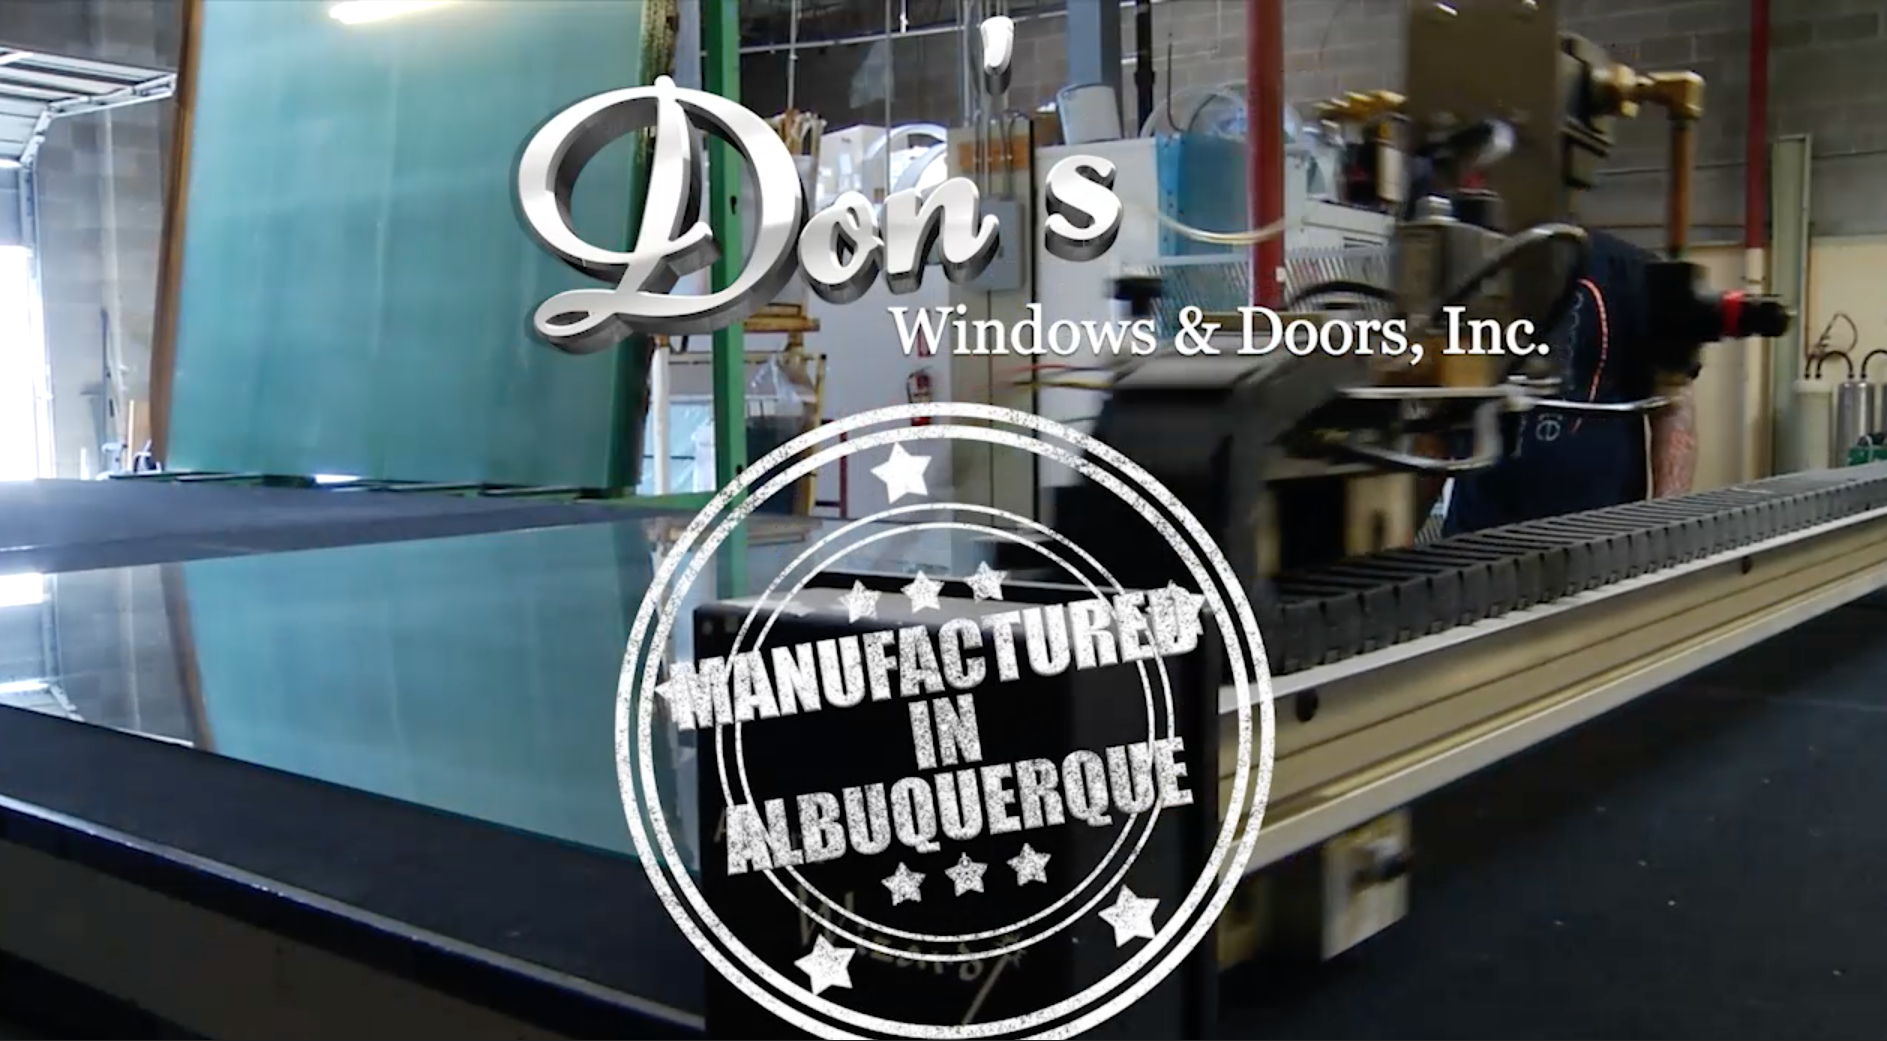 Image of Dons Windows and Doors with logo